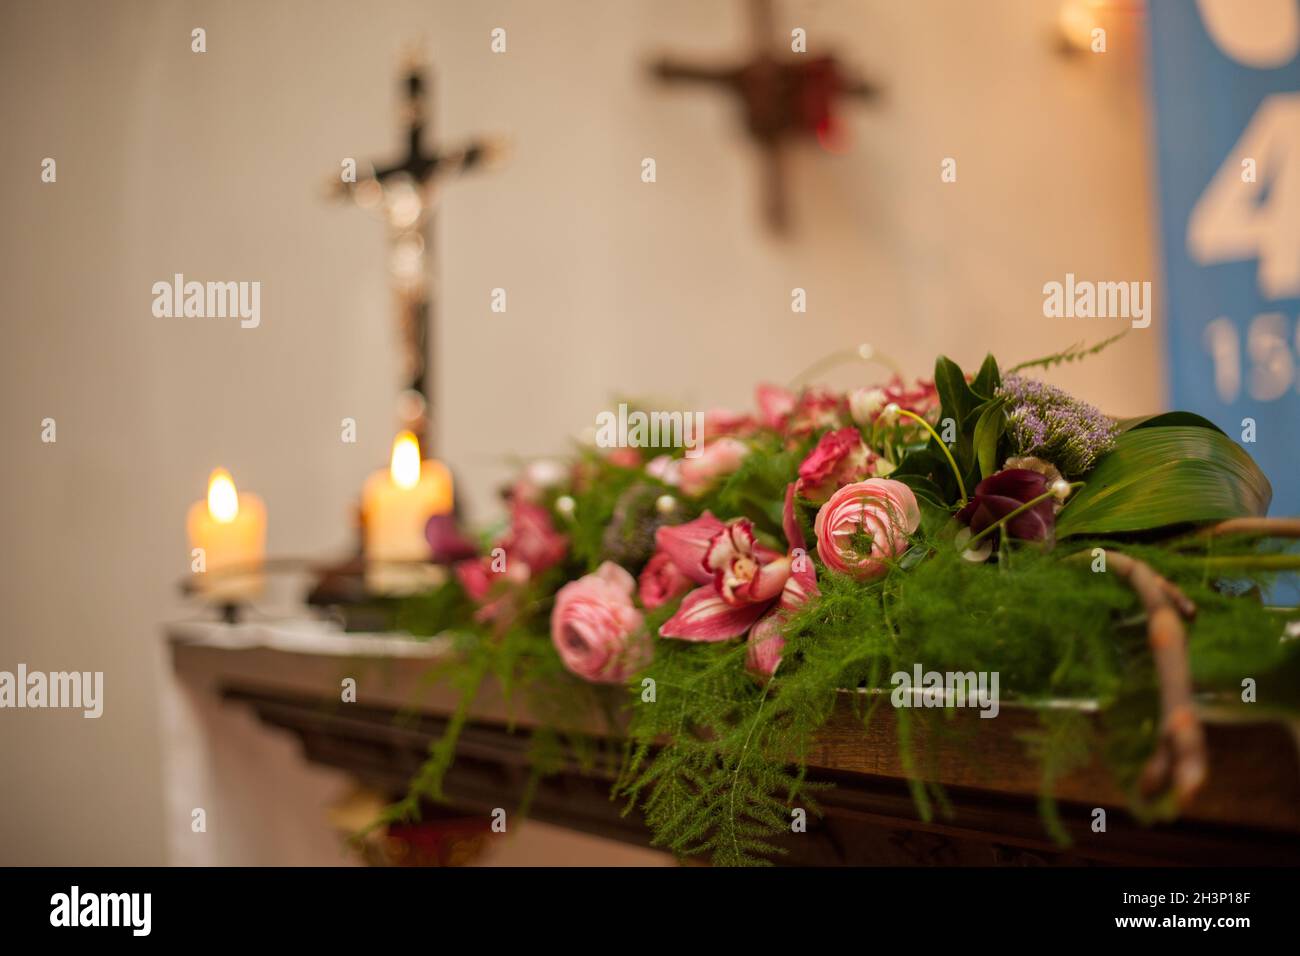 Interior of a Roman Catholic Church with polychrome decoration of the altar and flowers, with an out of focus cross with Jesus C Stock Photo